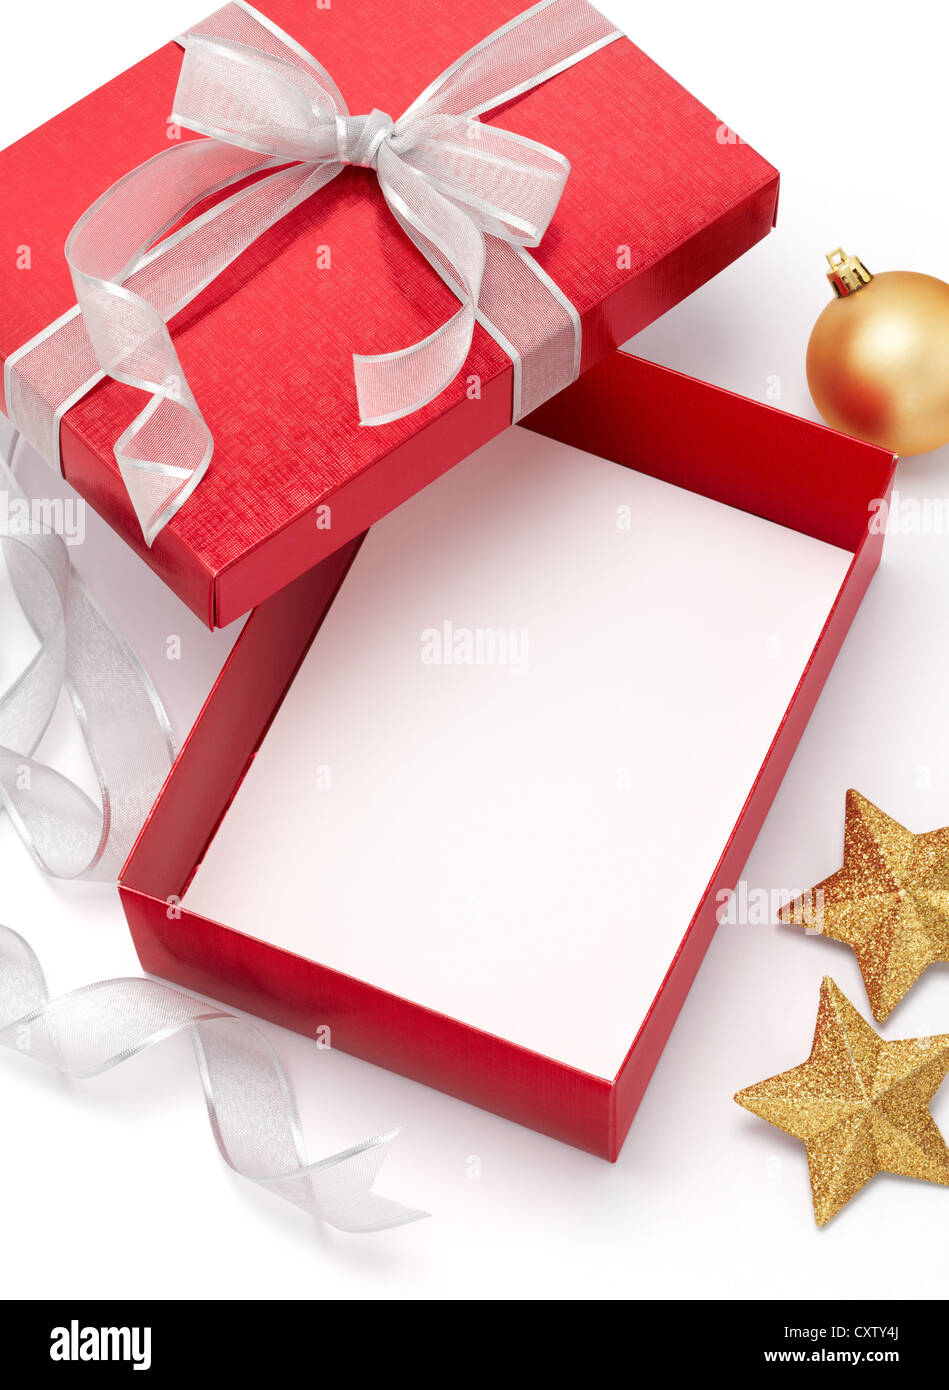 empty gift box with christmas ornaments on white background Stock Photo